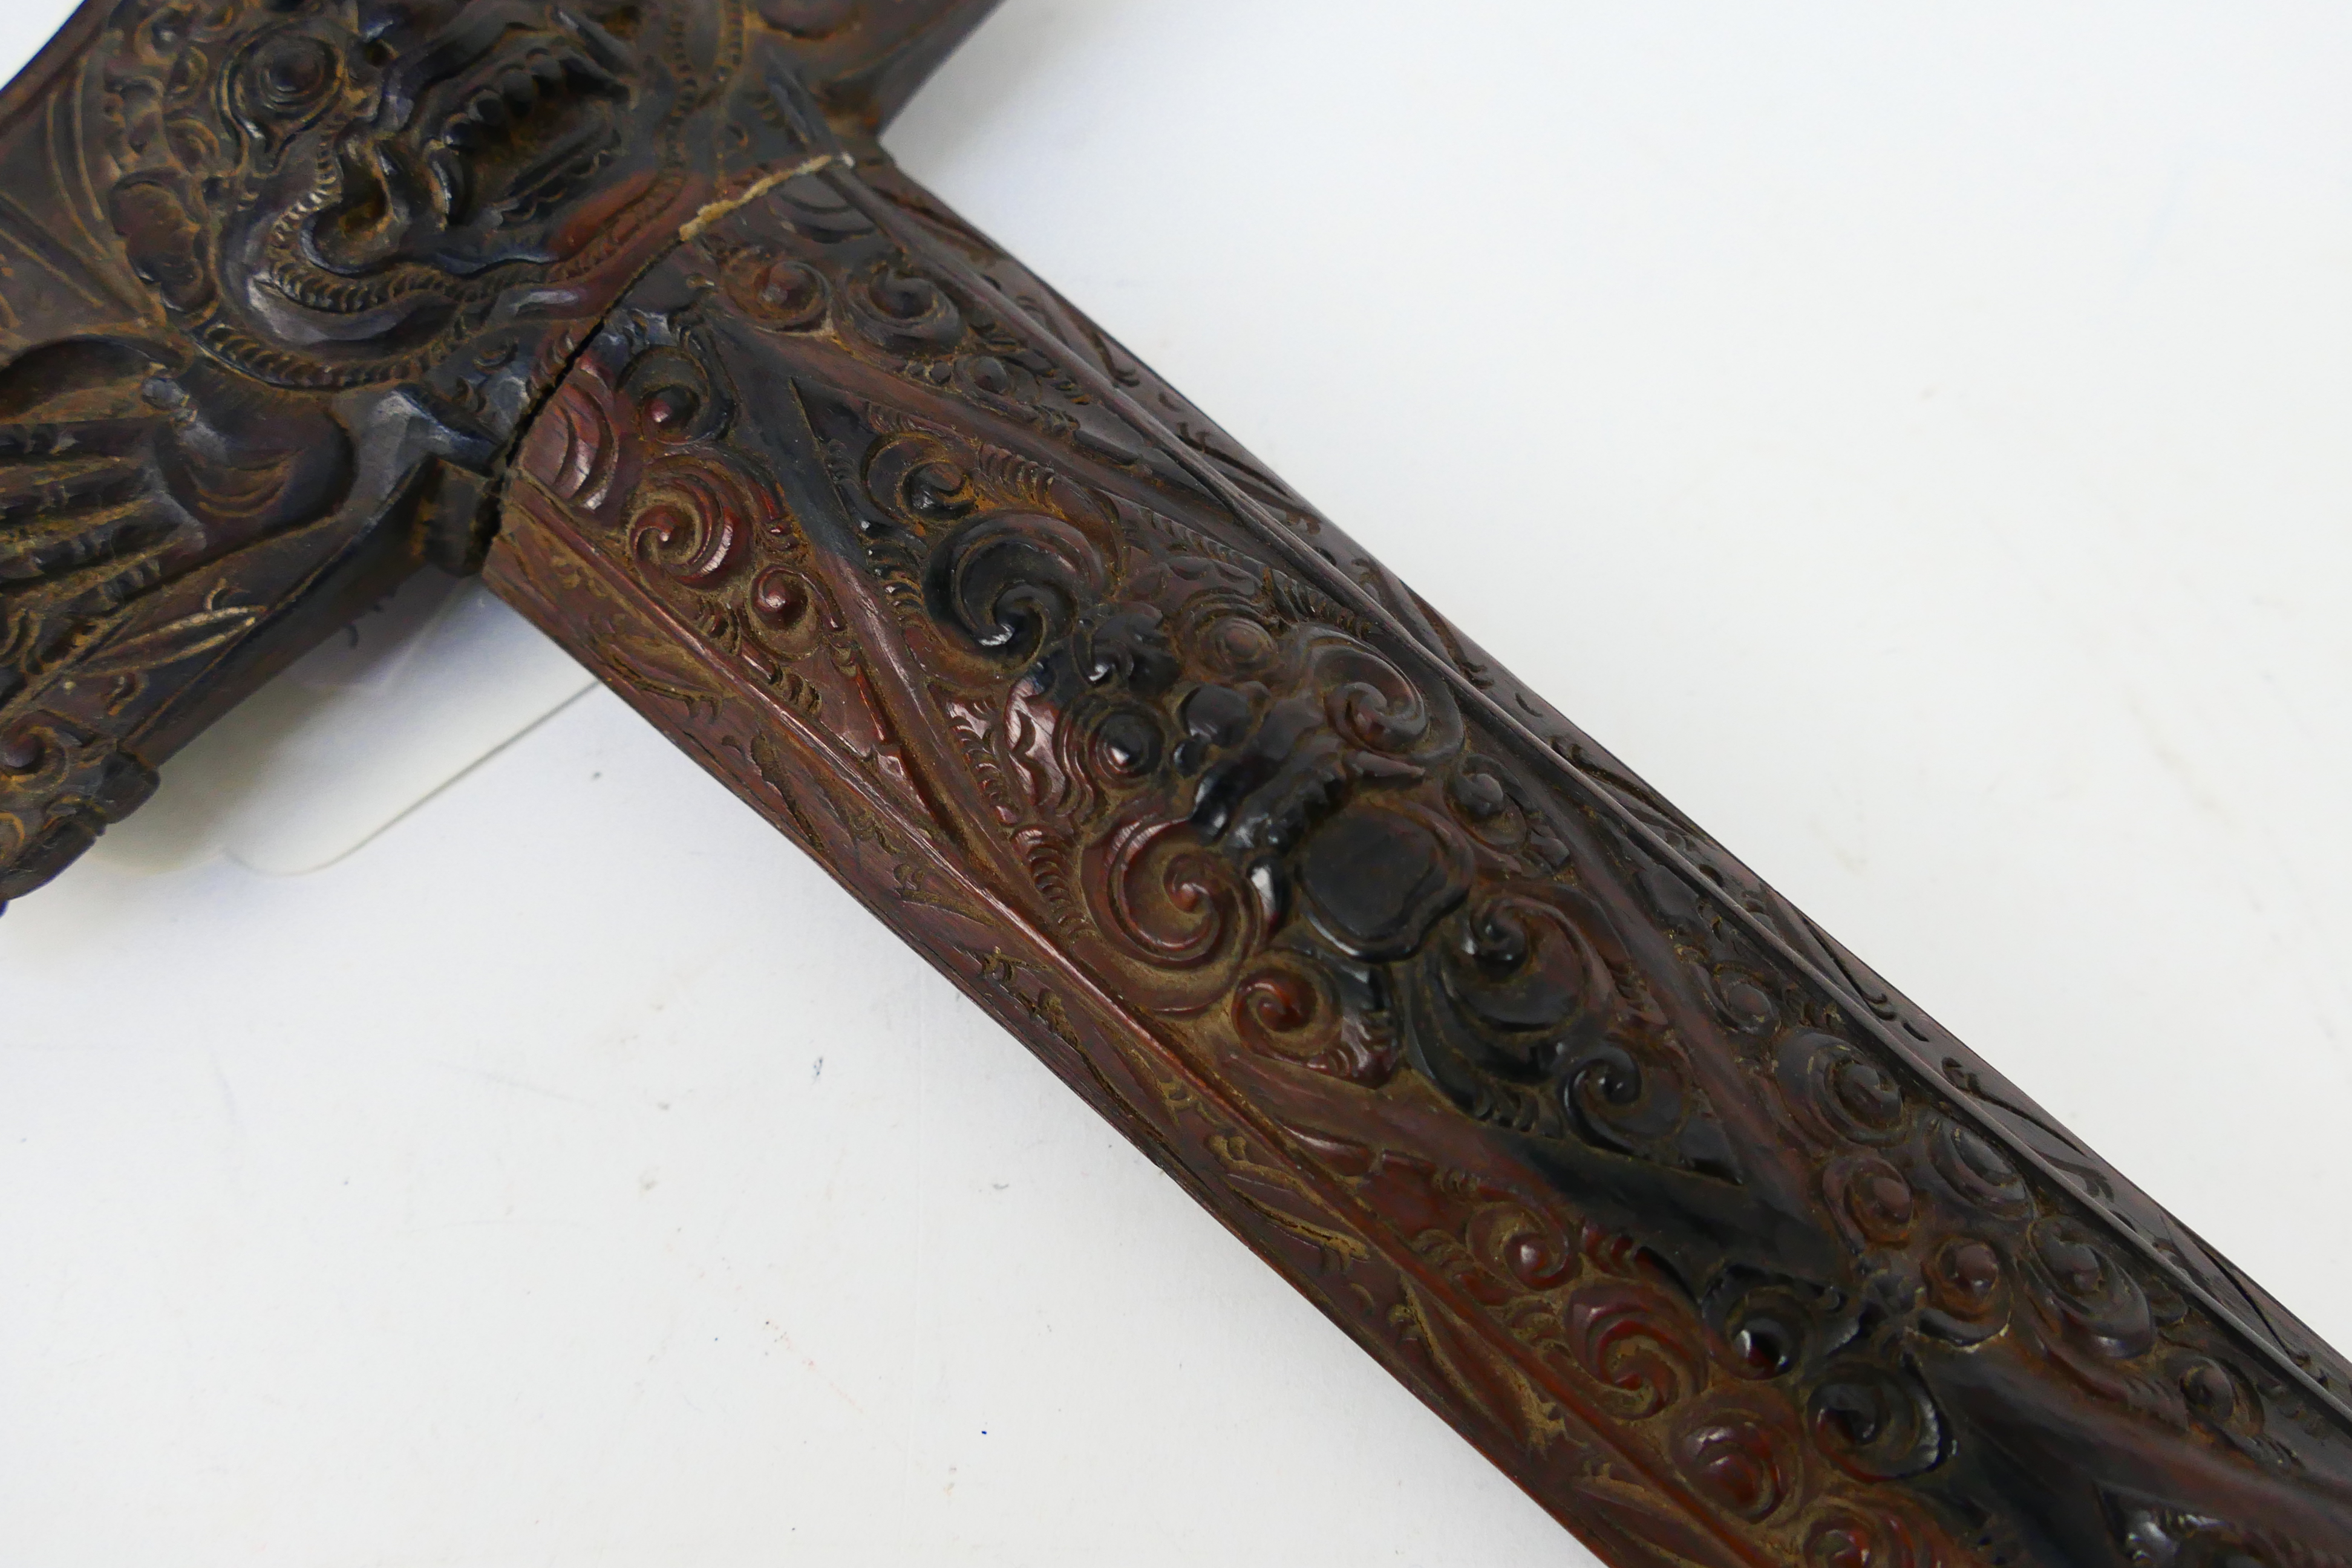 An Indonesian Kris with intricately carved scabbard and hilt, - Image 8 of 9